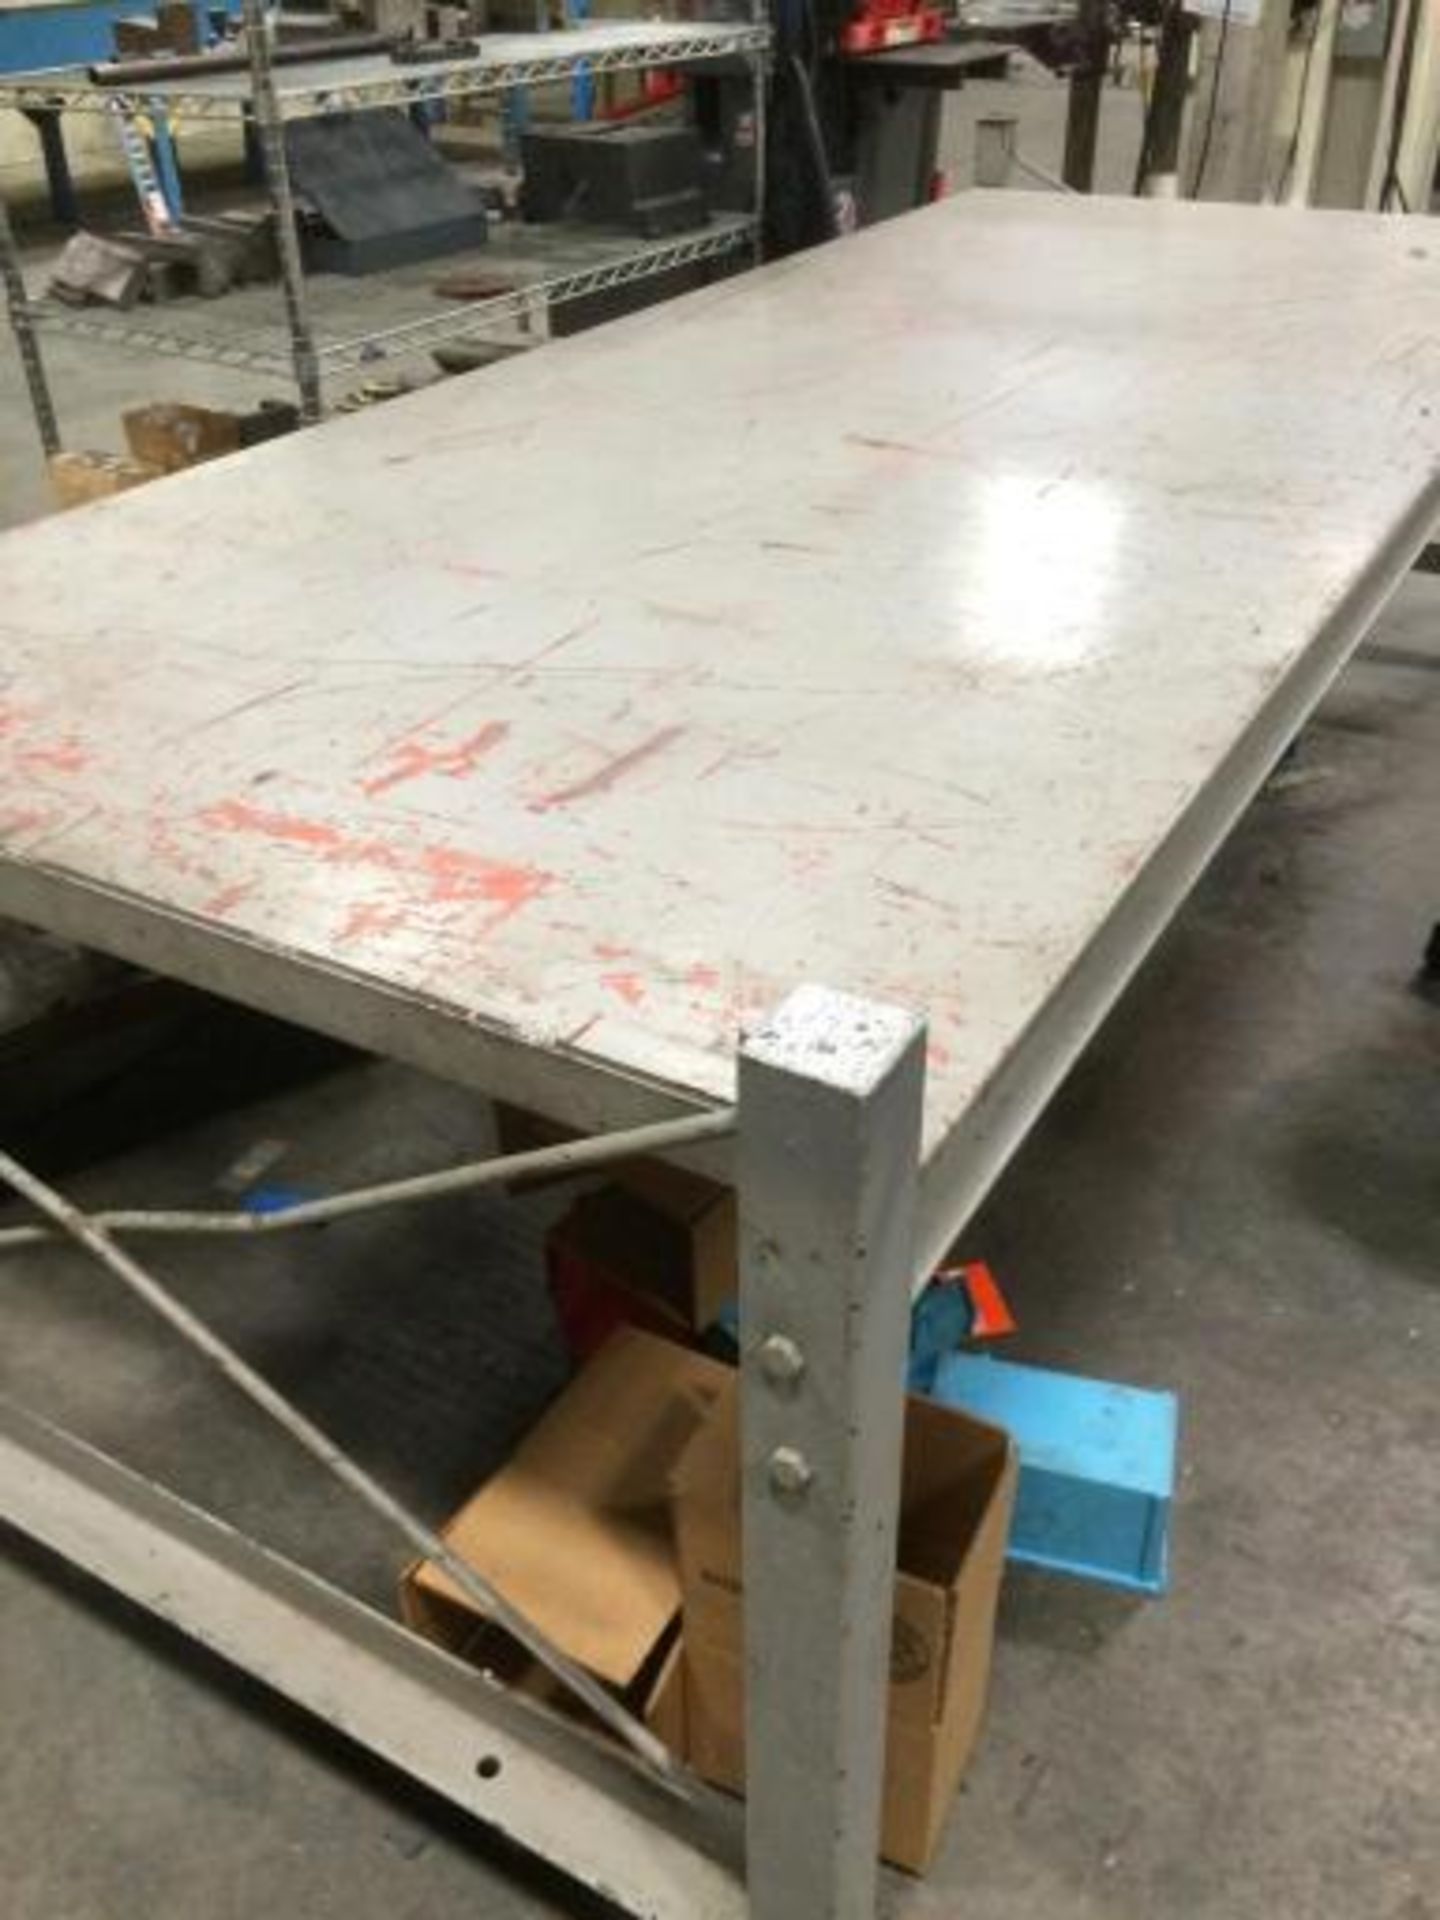 All steel and welded shop table with heavy duty casters. Measures 10' x 4' and bed stands 24"